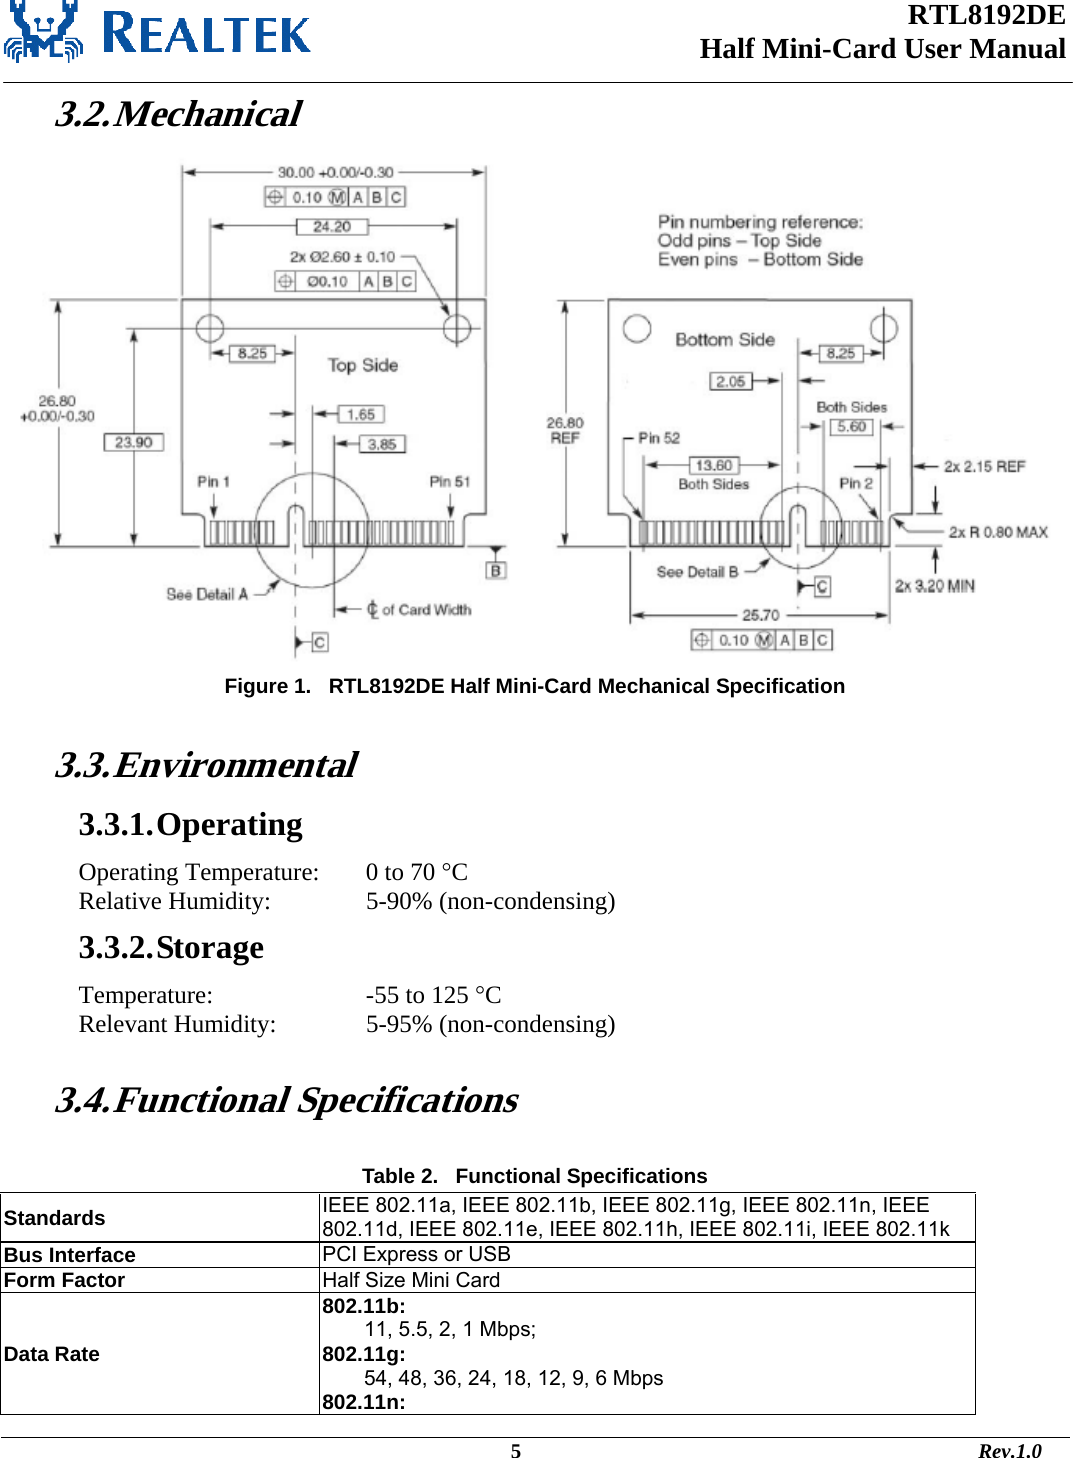 RTL8192DE Half Mini-Card User Manual   3.2. Mechanical  Figure 1.   RTL8192DE Half Mini-Card Mechanical Specification  3.3. Environmental 3.3.1. Operating Operating Temperature:   0 to 70 °C Relative Humidity:     5-90% (non-condensing) 3.3.2. Storage Temperature:       -55 to 125 °C  Relevant Humidity:     5-95% (non-condensing)  3.4. Functional Specifications  Table 2.   Functional Specifications Standards IEEE 802.11a, IEEE 802.11b, IEEE 802.11g, IEEE 802.11n, IEEE 802.11d, IEEE 802.11e, IEEE 802.11h, IEEE 802.11i, IEEE 802.11k Bus Interface  PCI Express or USB Form Factor  Half Size Mini Card Data Rate 802.11b:  11, 5.5, 2, 1 Mbps; 802.11g:  54, 48, 36, 24, 18, 12, 9, 6 Mbps 802.11n:                                                                                              5                                                                                       Rev.1.0 